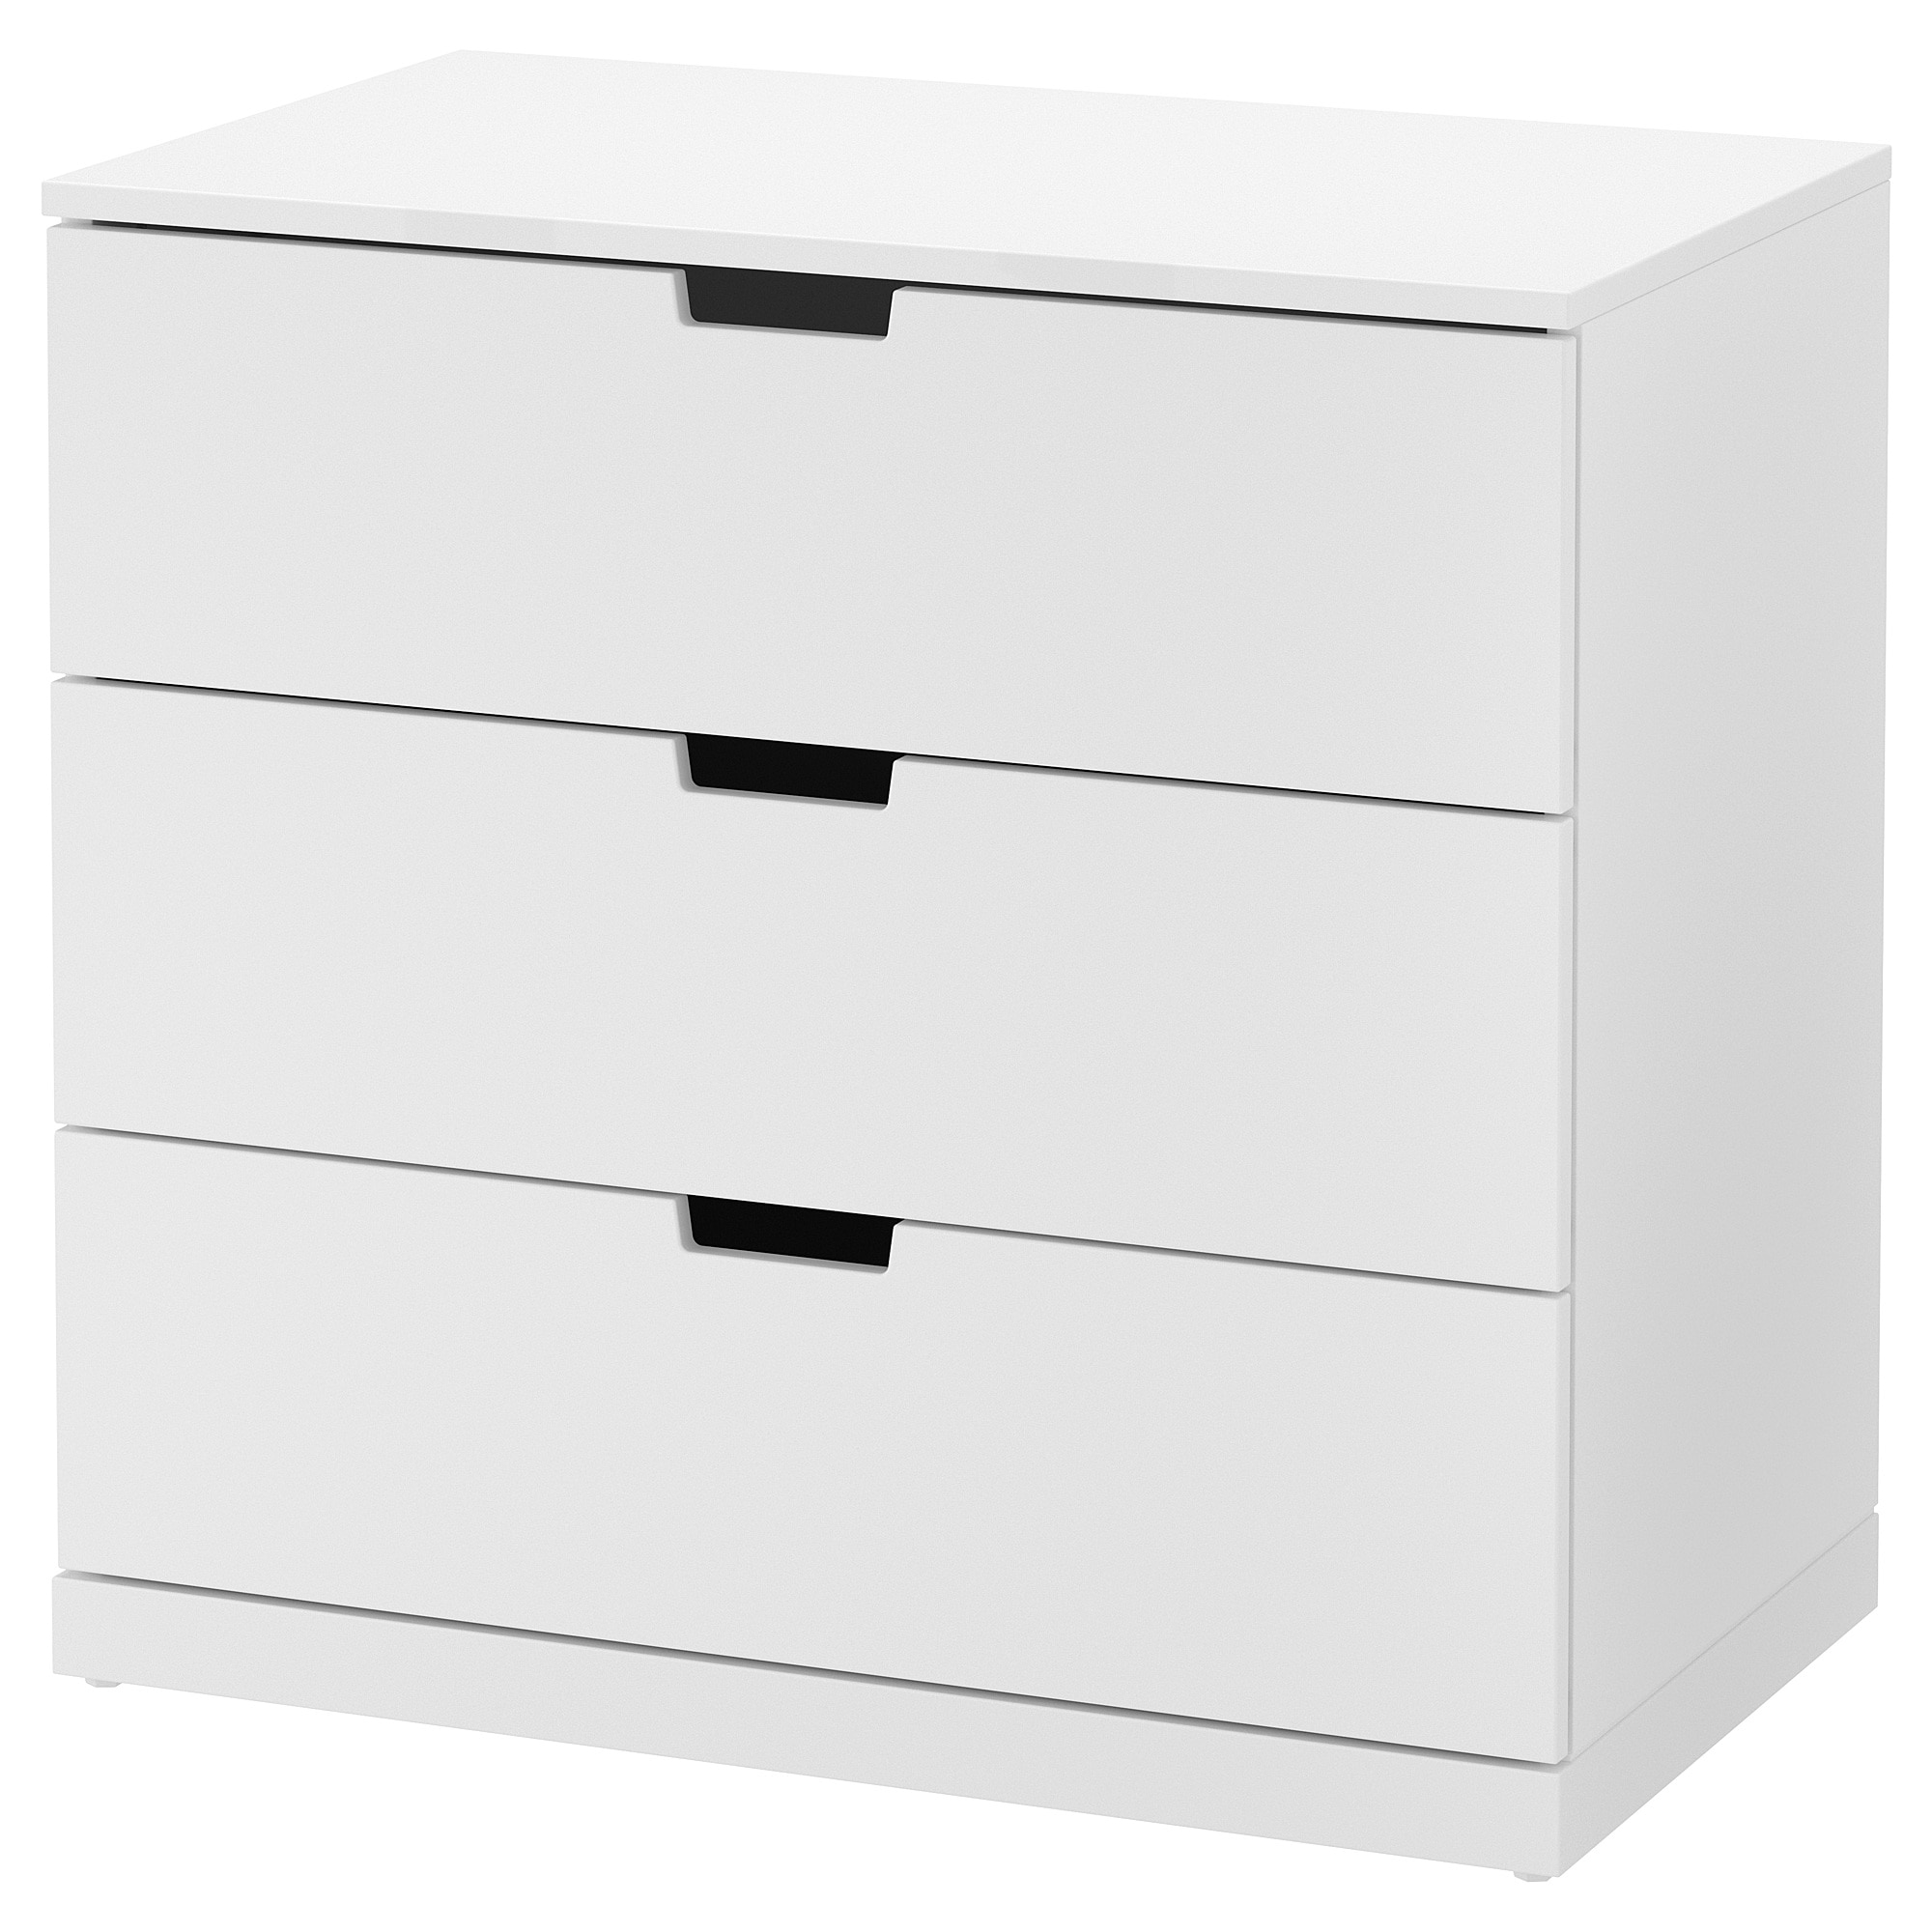 59208423 Nordli Chests of Drawers IKEA khmer in phnom penh cambodia